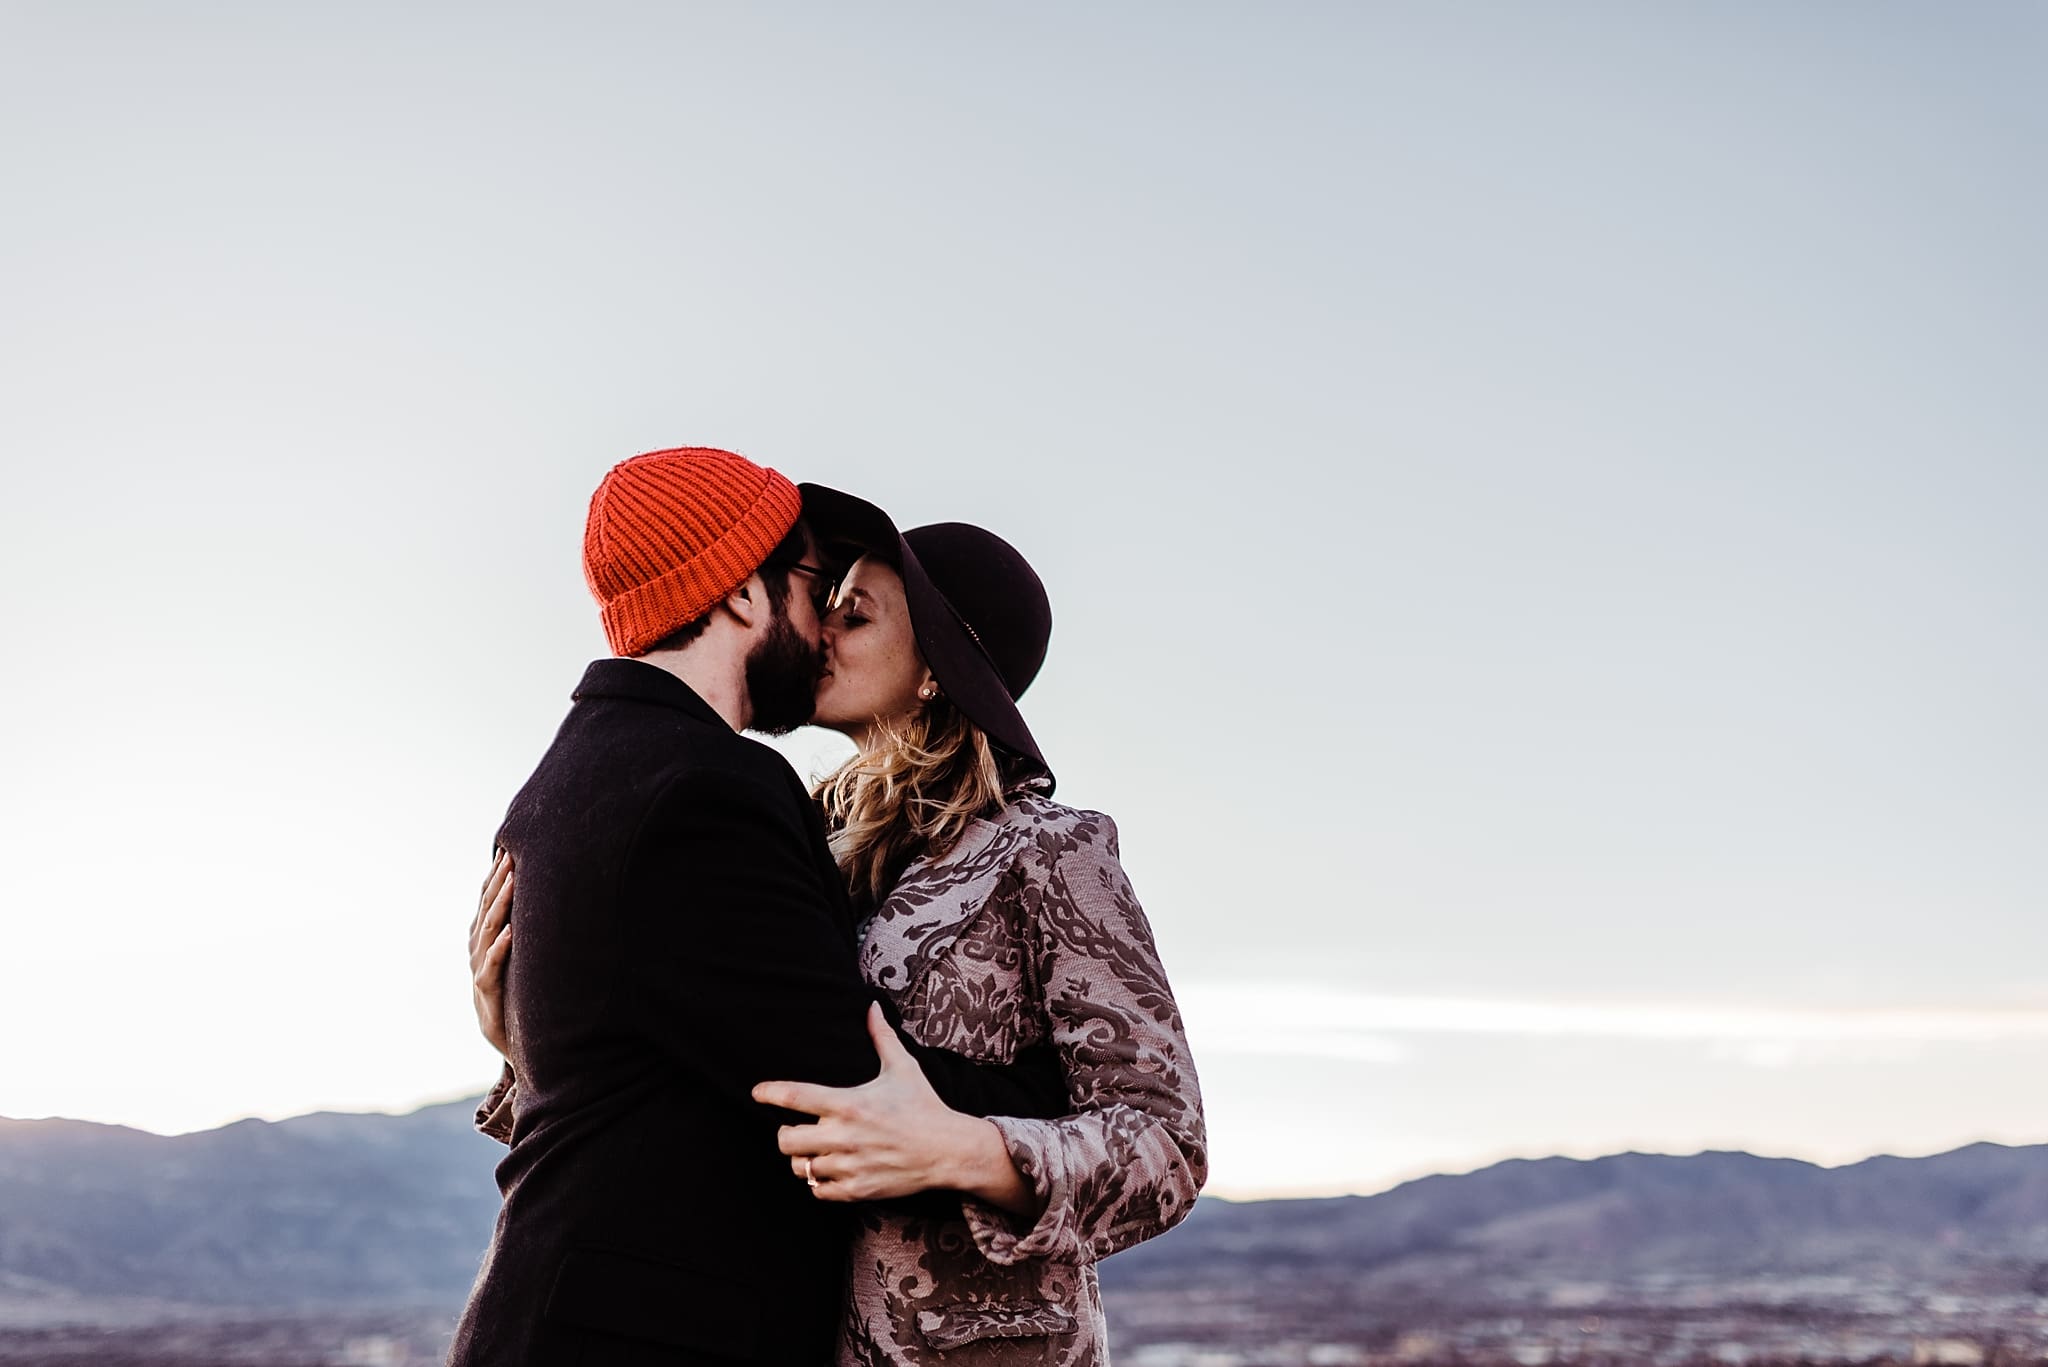 Palmer Park engagement session in Colorado Springs